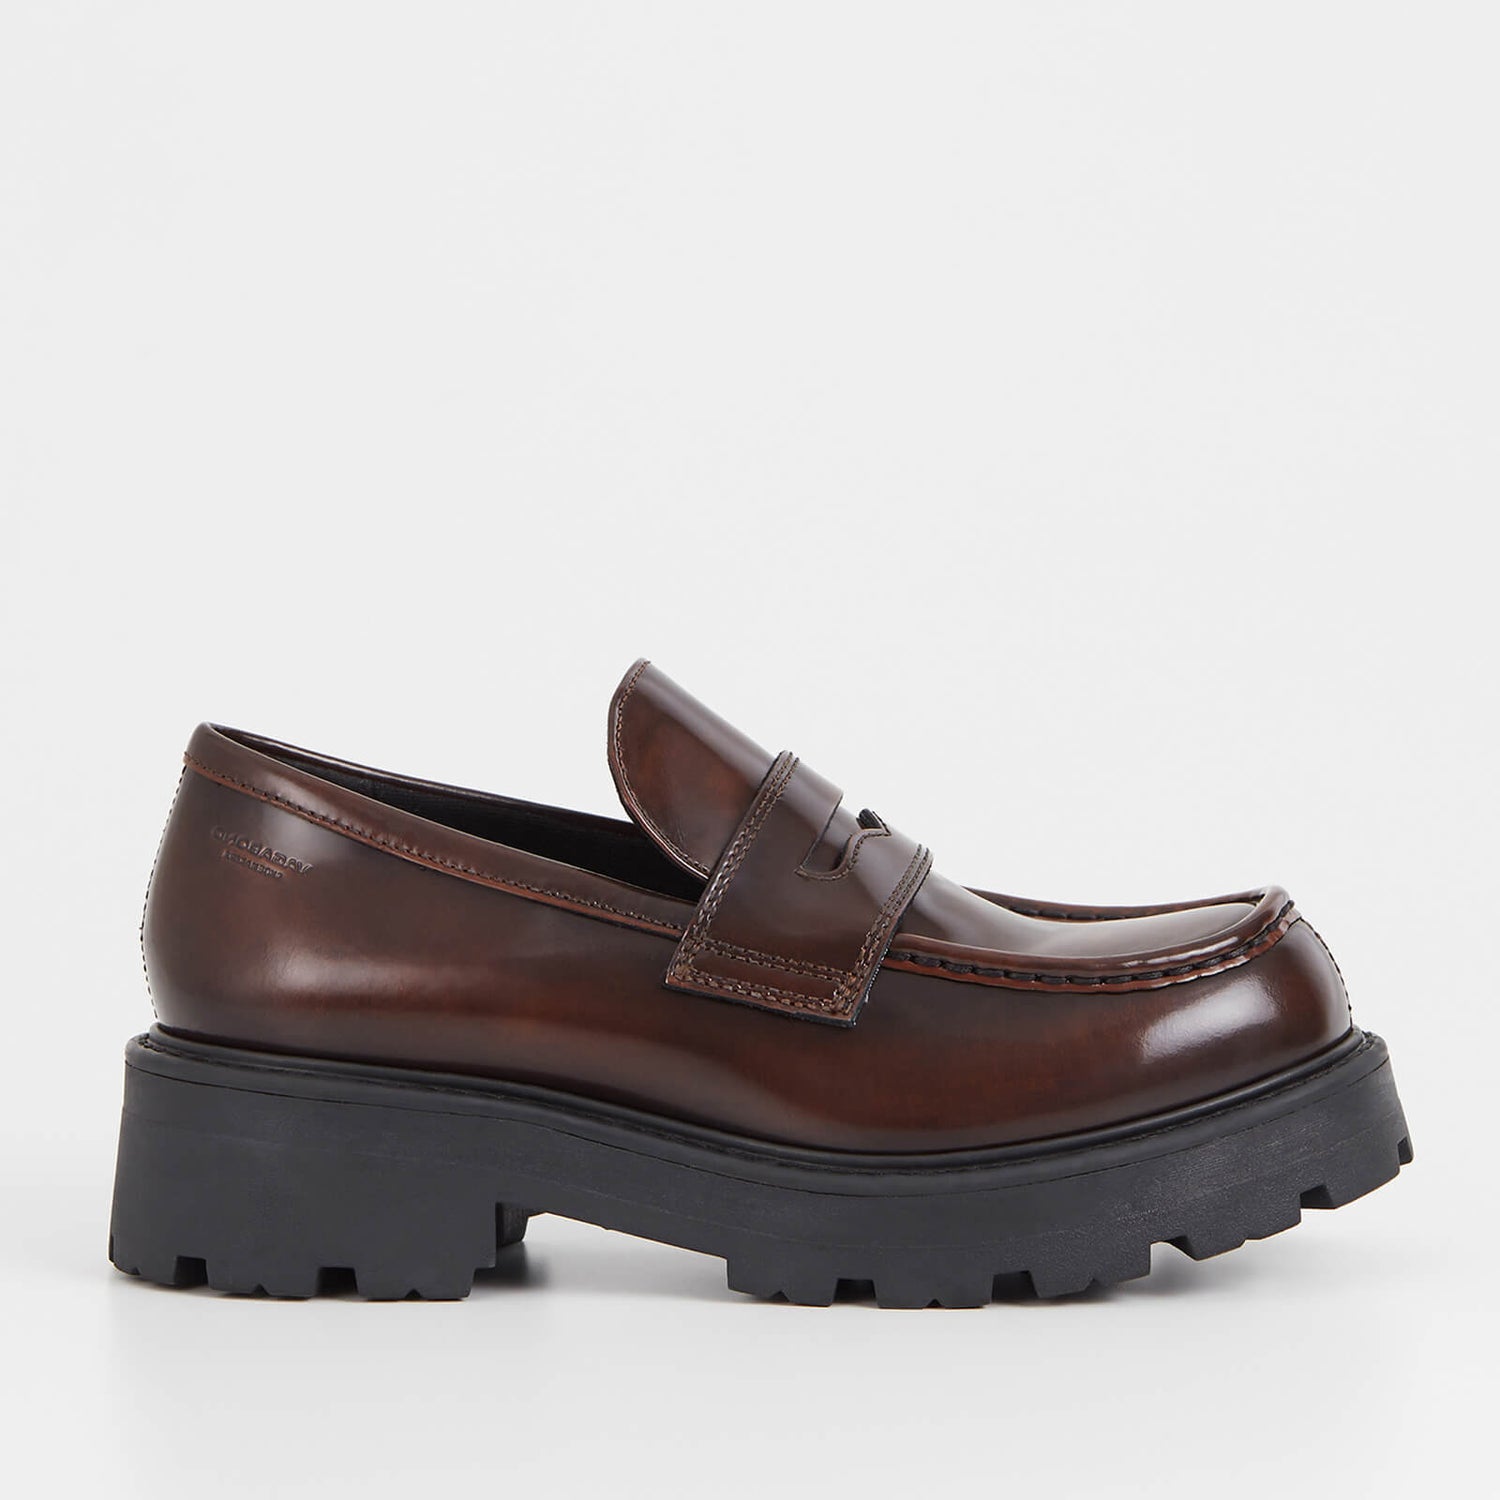 Vagabond Cosmo 2.0 Leather Loafers - UK 3